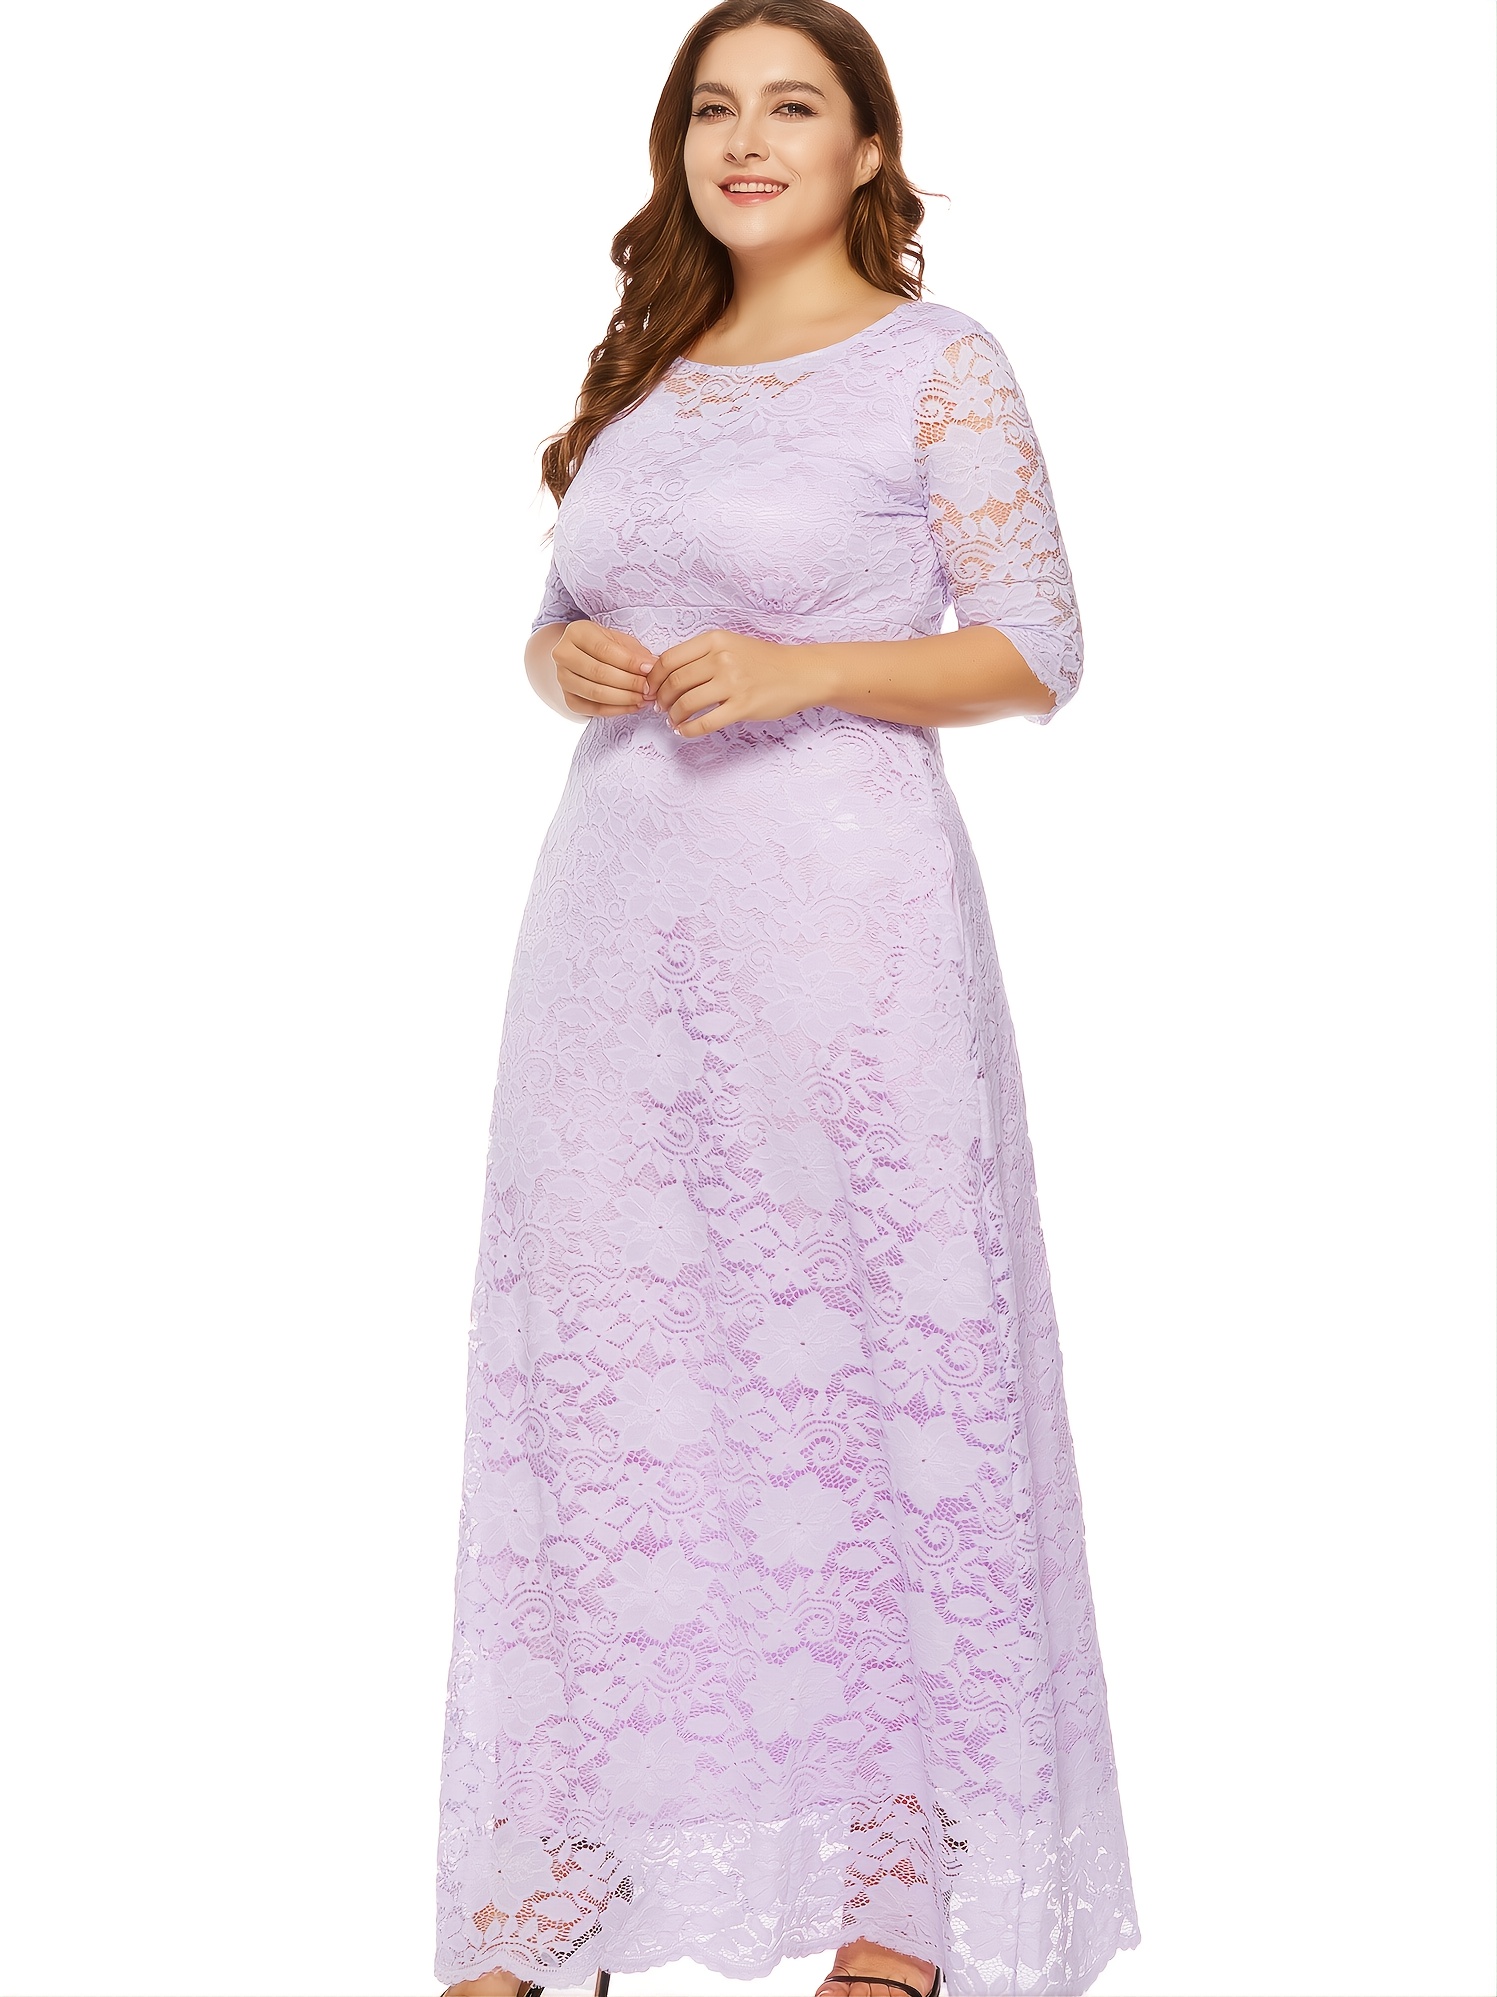 Plus Size White Lace African Wedding Dresses For Bridesmaids 2022 Boat Neck  Short Sleeve Sheath Maid Of Honor Gowns Bridesmaid Dress From Lovemydress,  $61.16